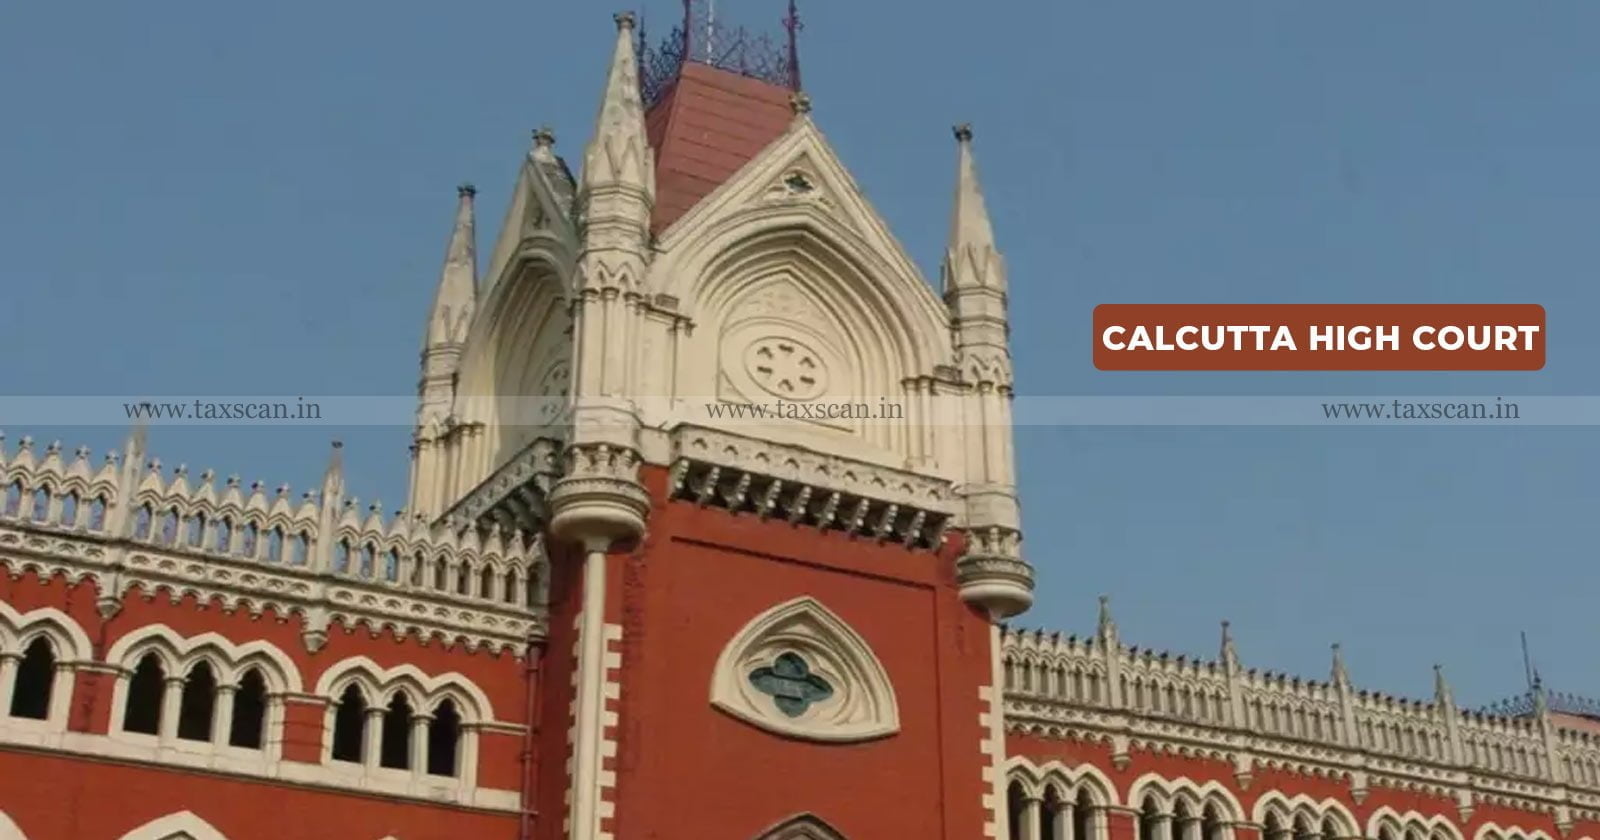 Liability of Additional - GST - execution - Government contracts - Calcutta HC - Directs Re-Consideration - taxscan